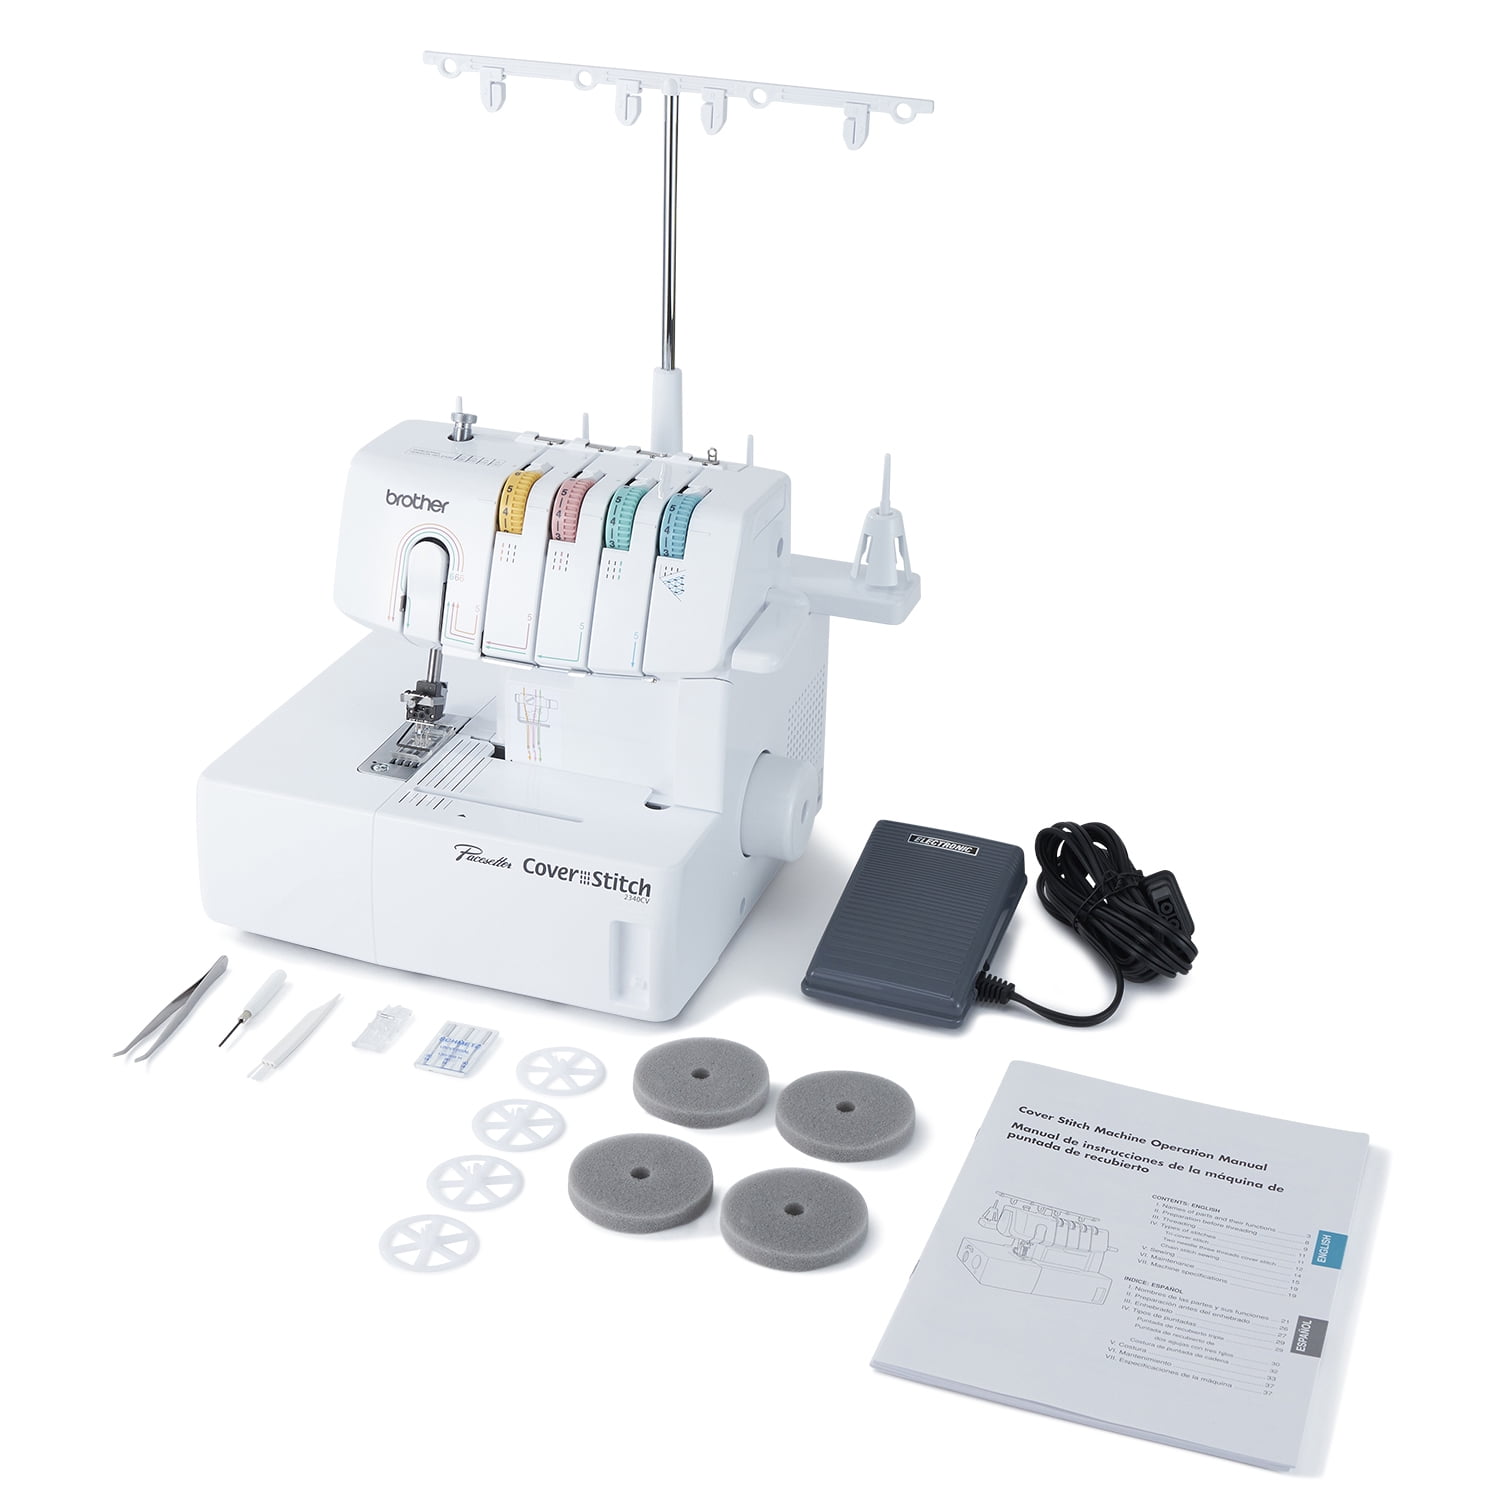 Brother 2340CV Cover Stitch Electronic Serger Machine for sale online